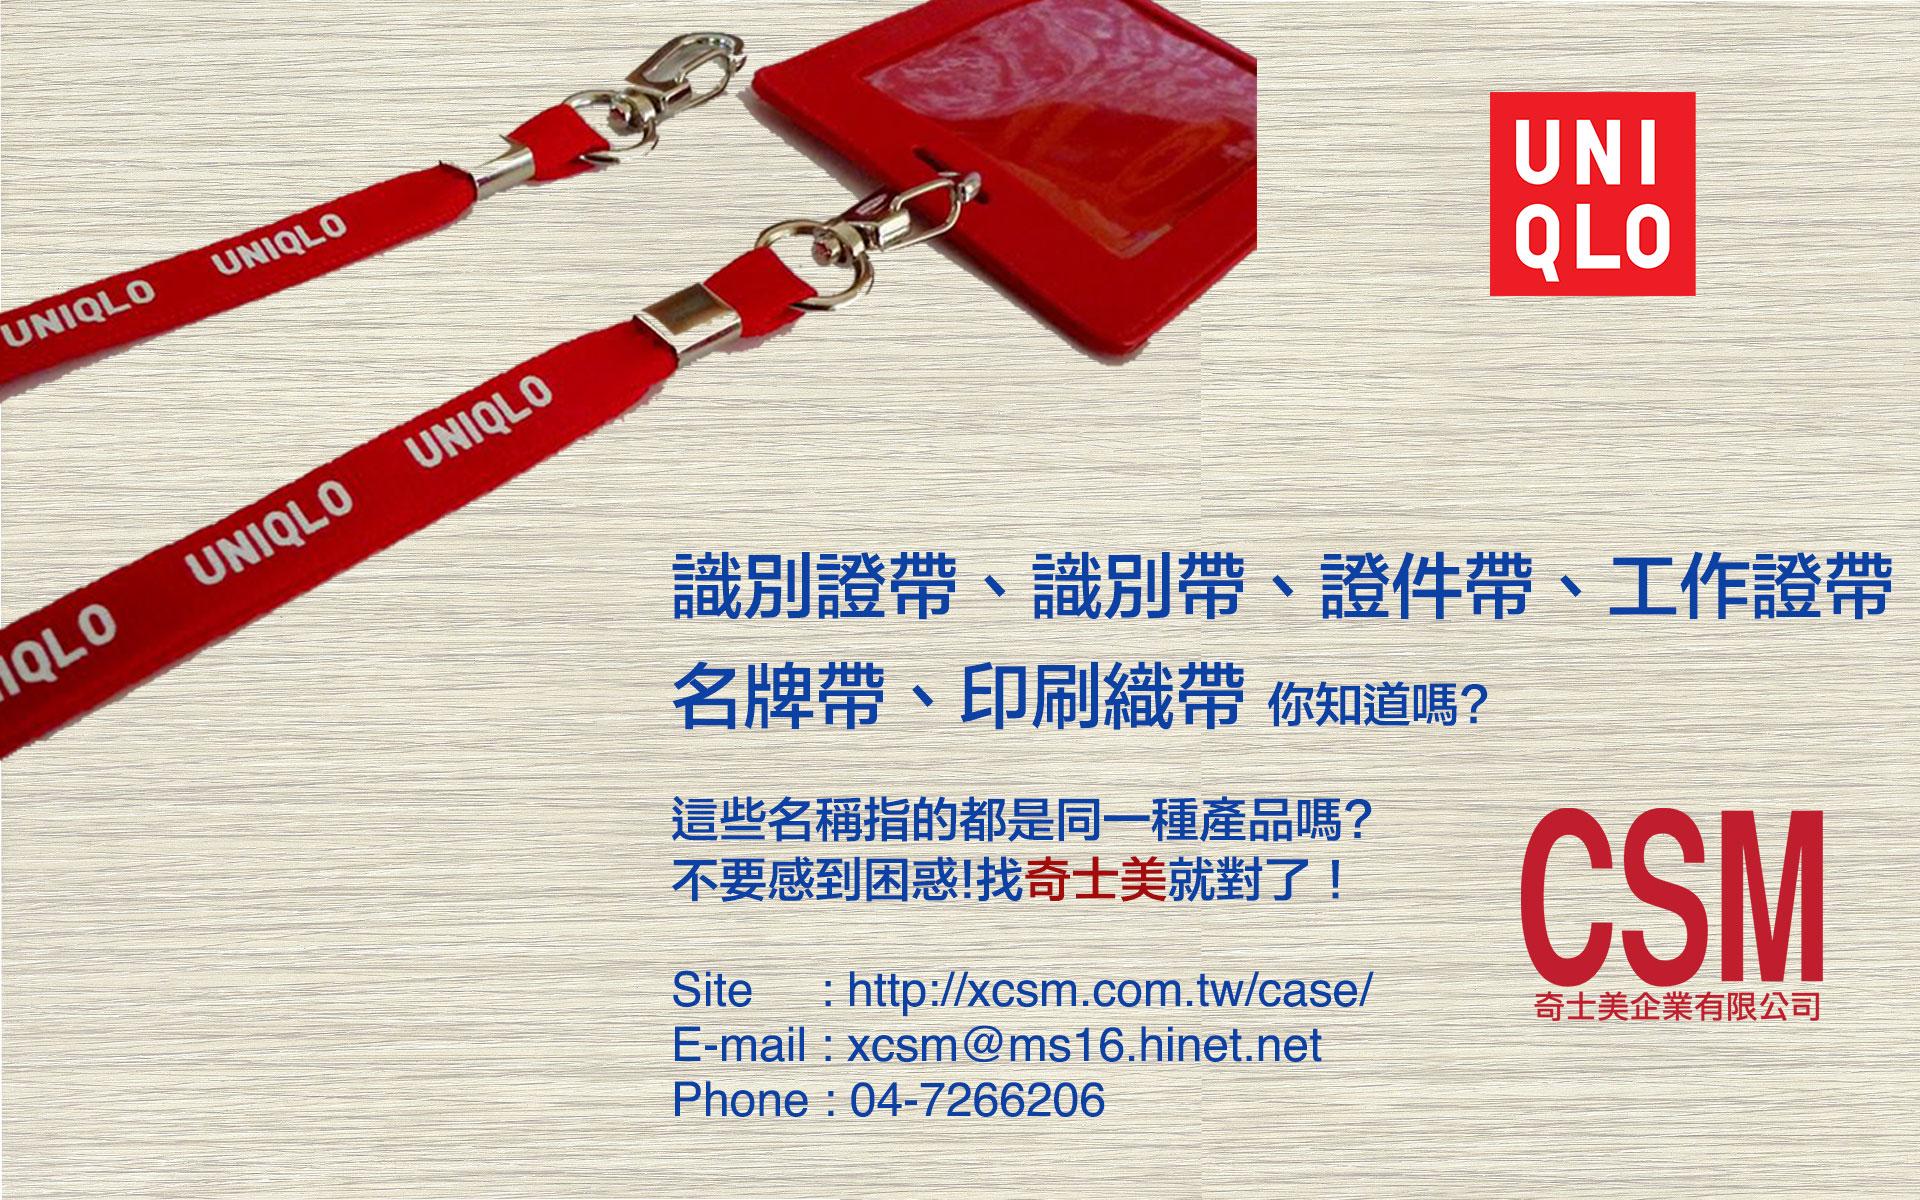 Lanyard on Twitter: "UNIQLO High quality ID Name badge holders, custom  lanyards, Printed lanyards http://t.co/jDxsx2sXK1 http://t.co/HTdrICehkw" /  Twitter